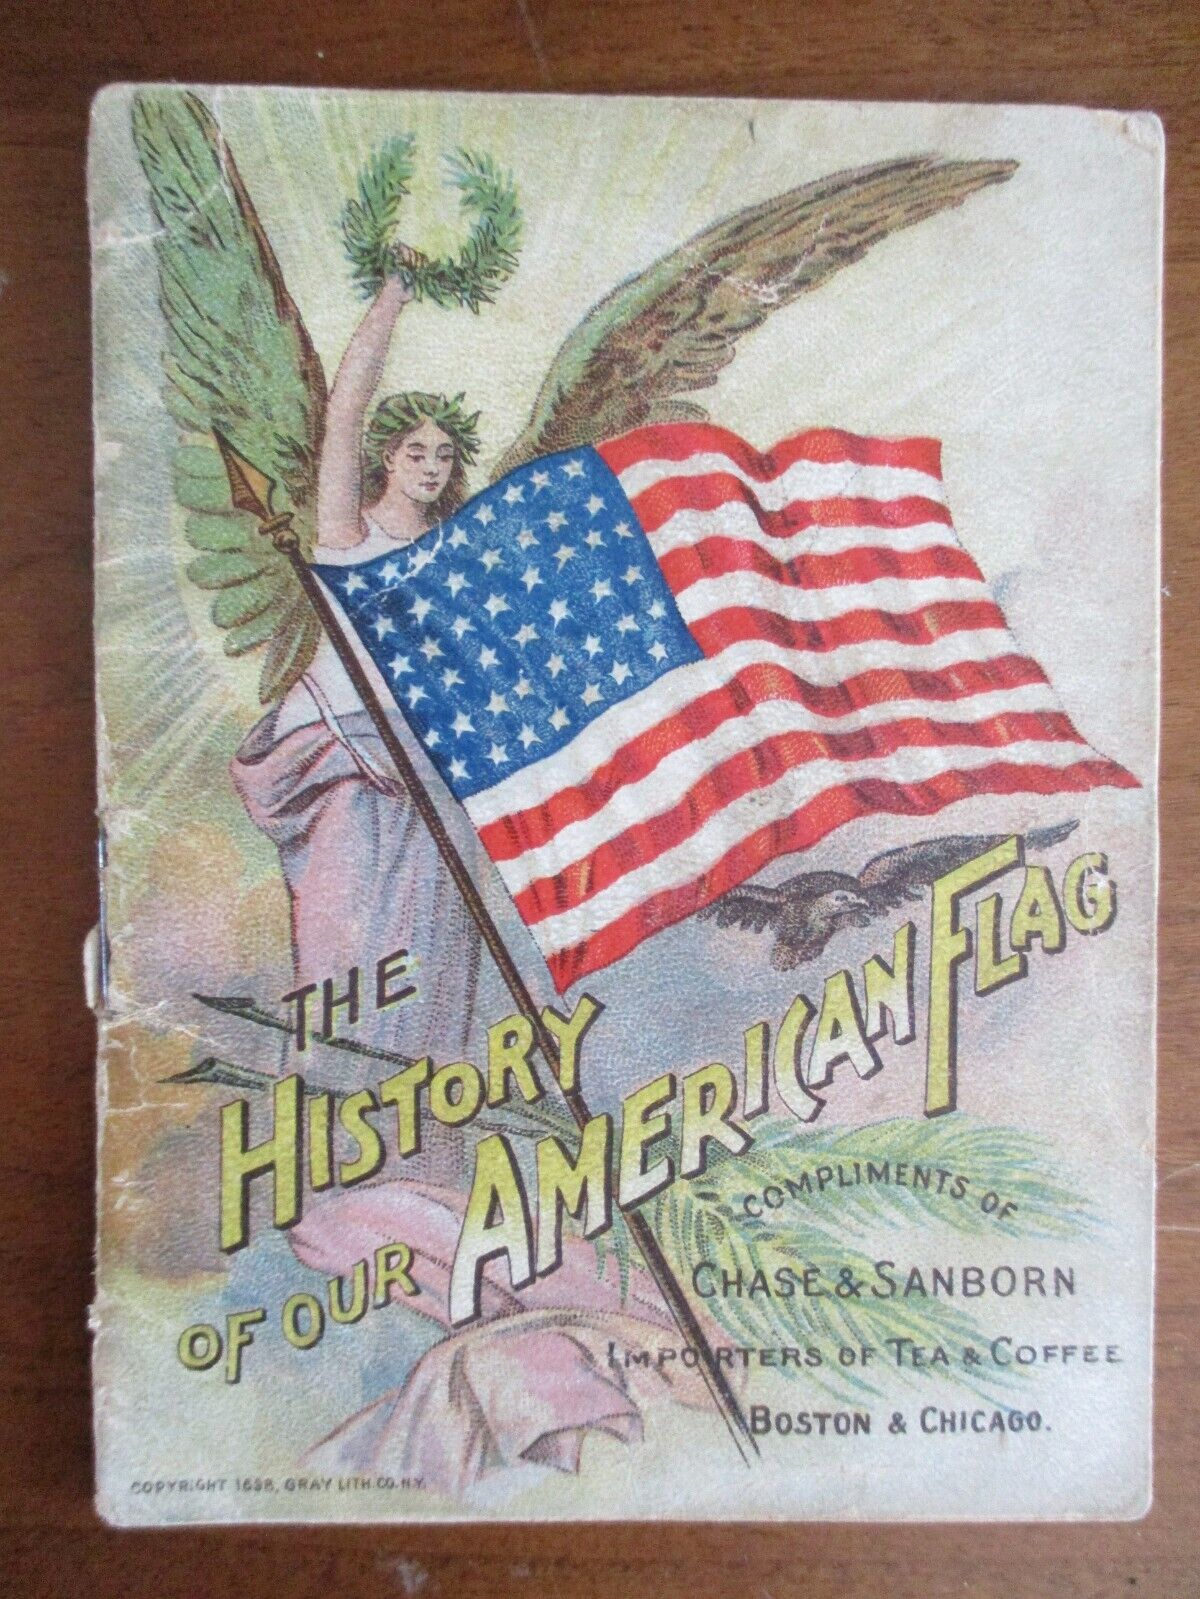 1898 CHASE & SANBORN advertising THE HISTORY OF THE AMERICAN FLAG 6 color flags